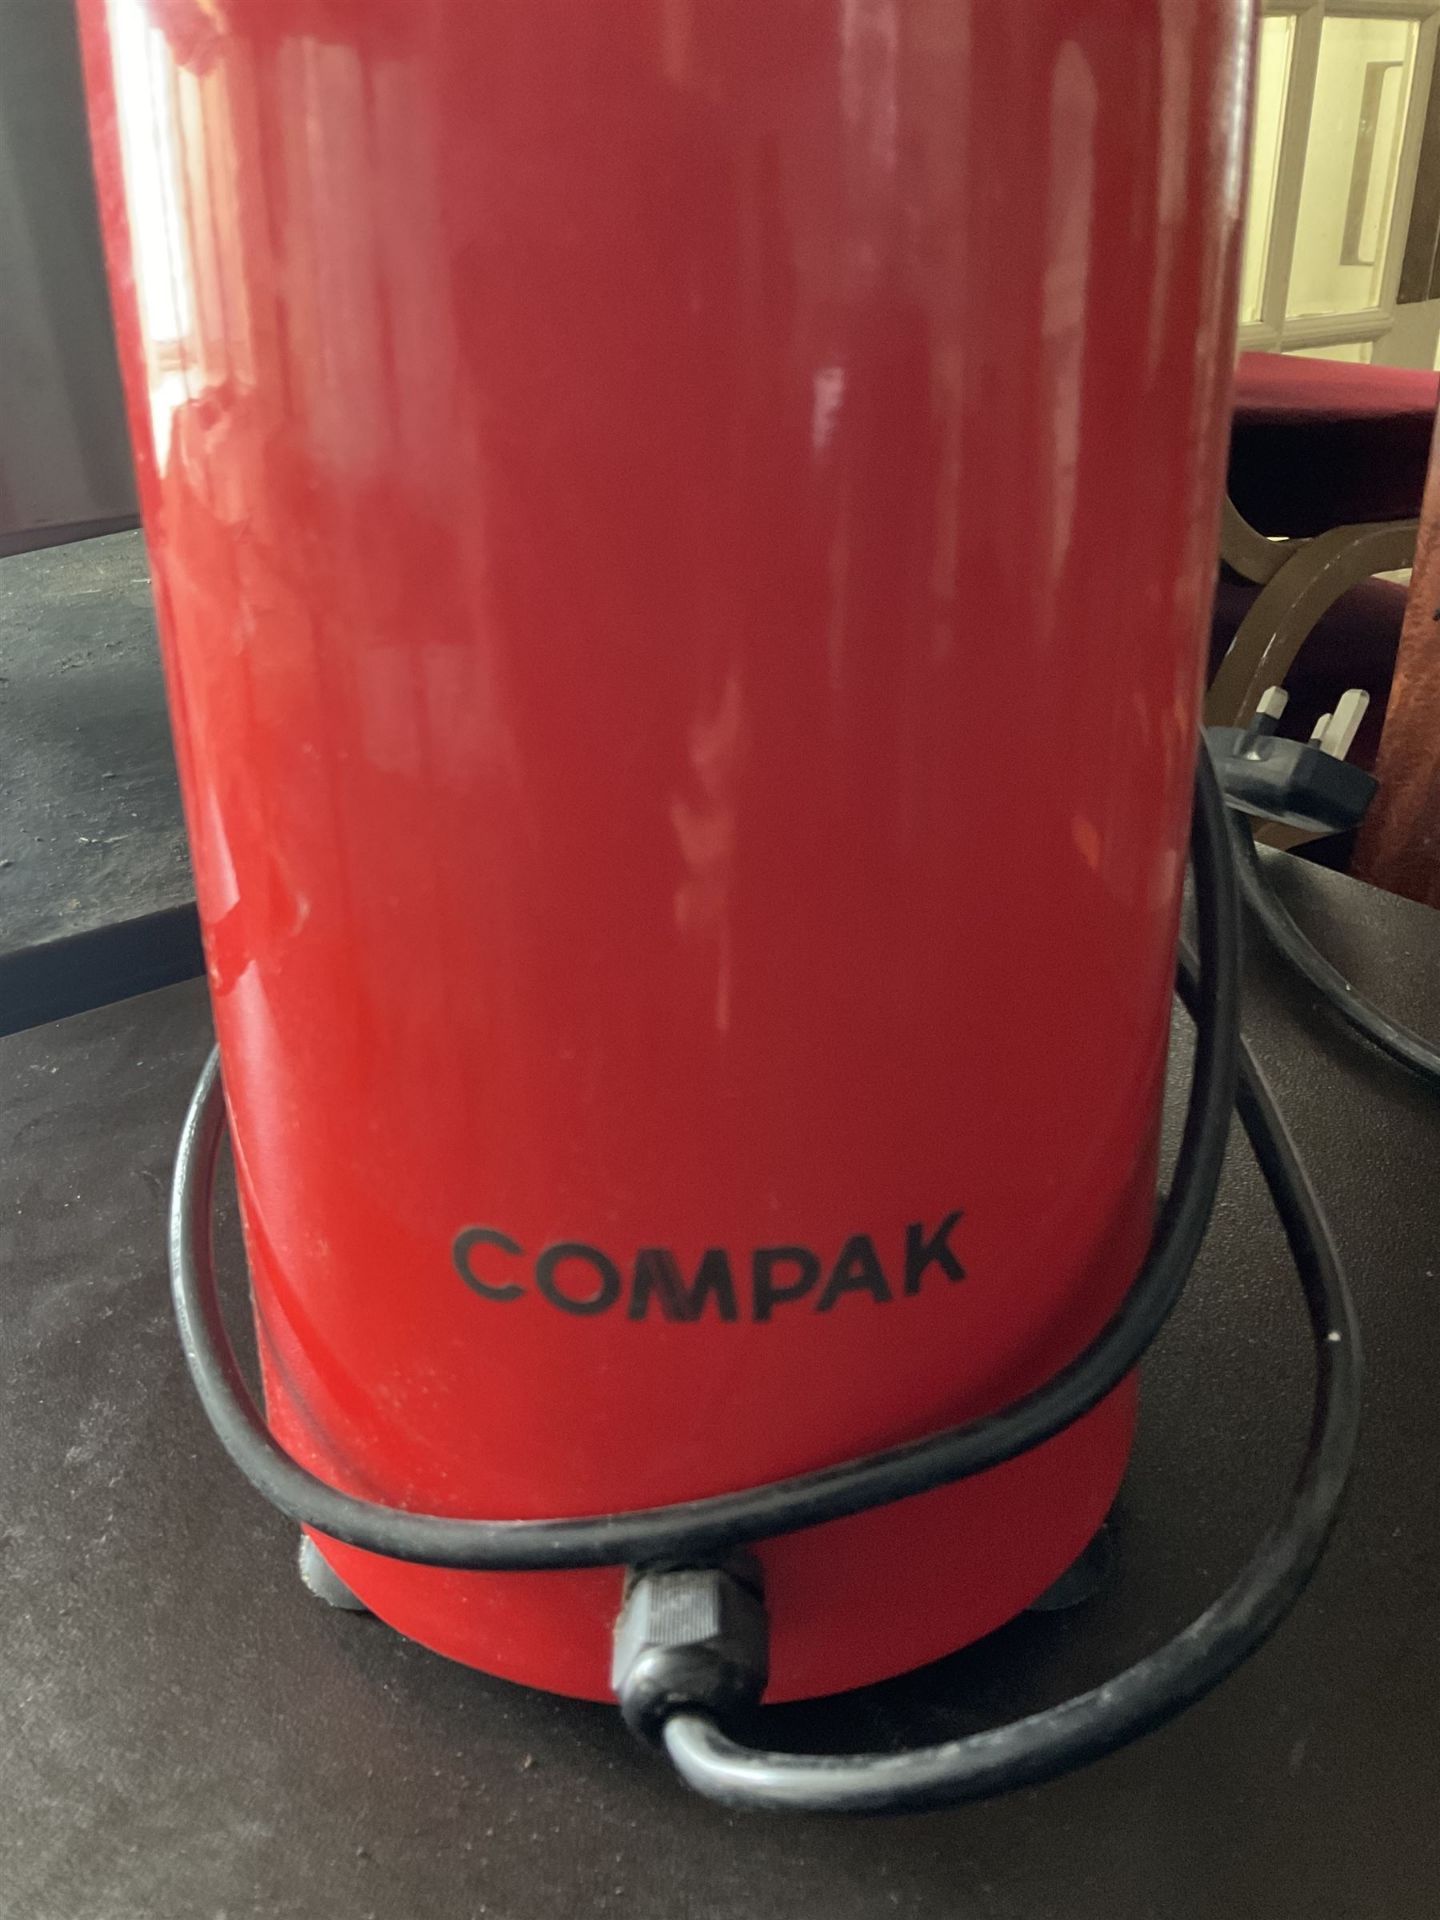 Compak K3 touch red Ferrari coffee bean grinder- LOT SUBJECT TO VAT ON THE HAMMER PRICE - To be coll - Image 2 of 3